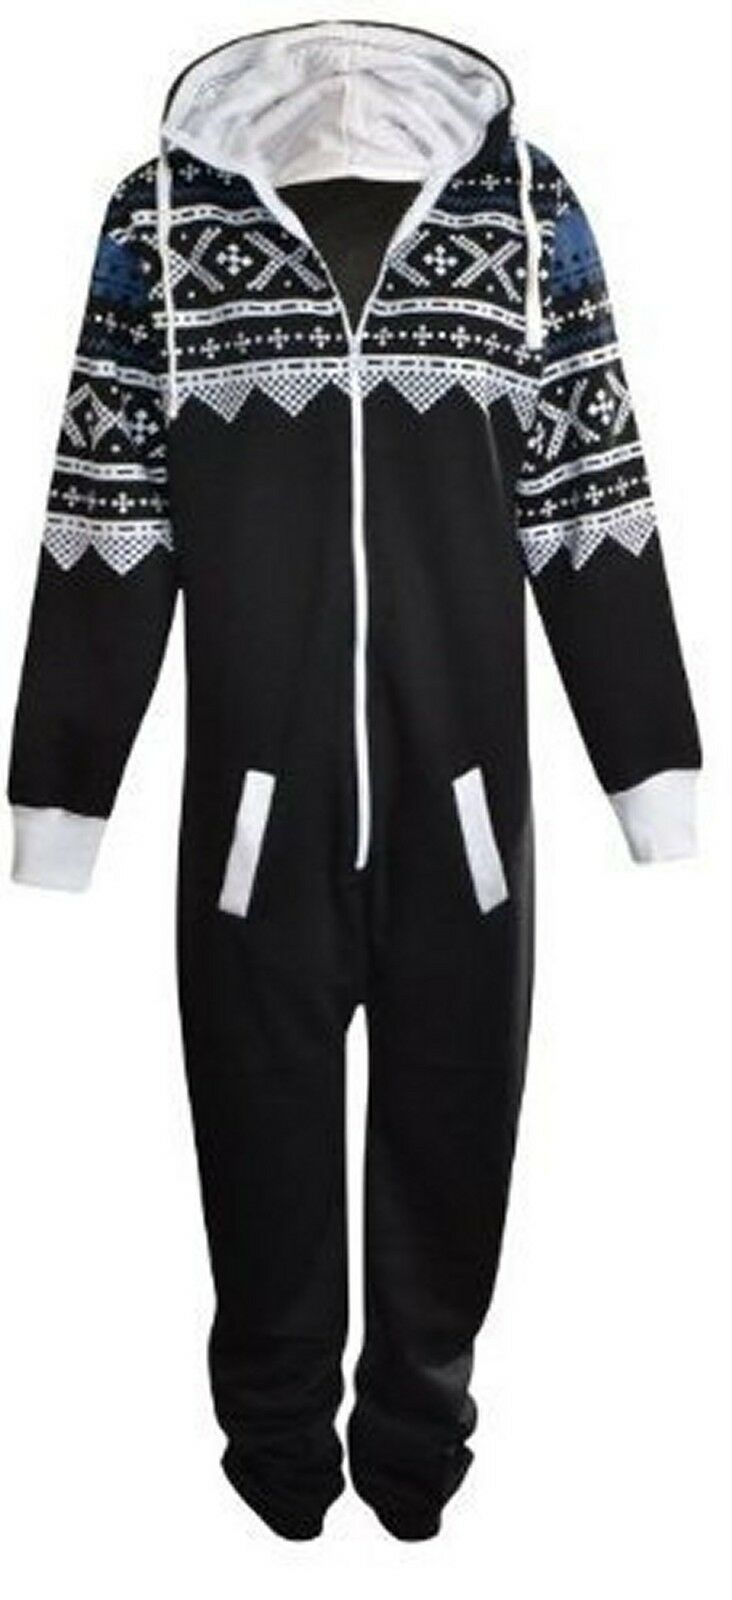 Black Aztec Onesie.These Have A White Cotton Lined Hood With The Rest Of The Onesie Being Fleece.They Have Elasticated Ribbed Cuffs And Front Pockets.The Zip At The Front Goes From The Neck To Just Below The Waist. These Are A Lose Fit Onesie. Sizes 2XL To 4XL Available.